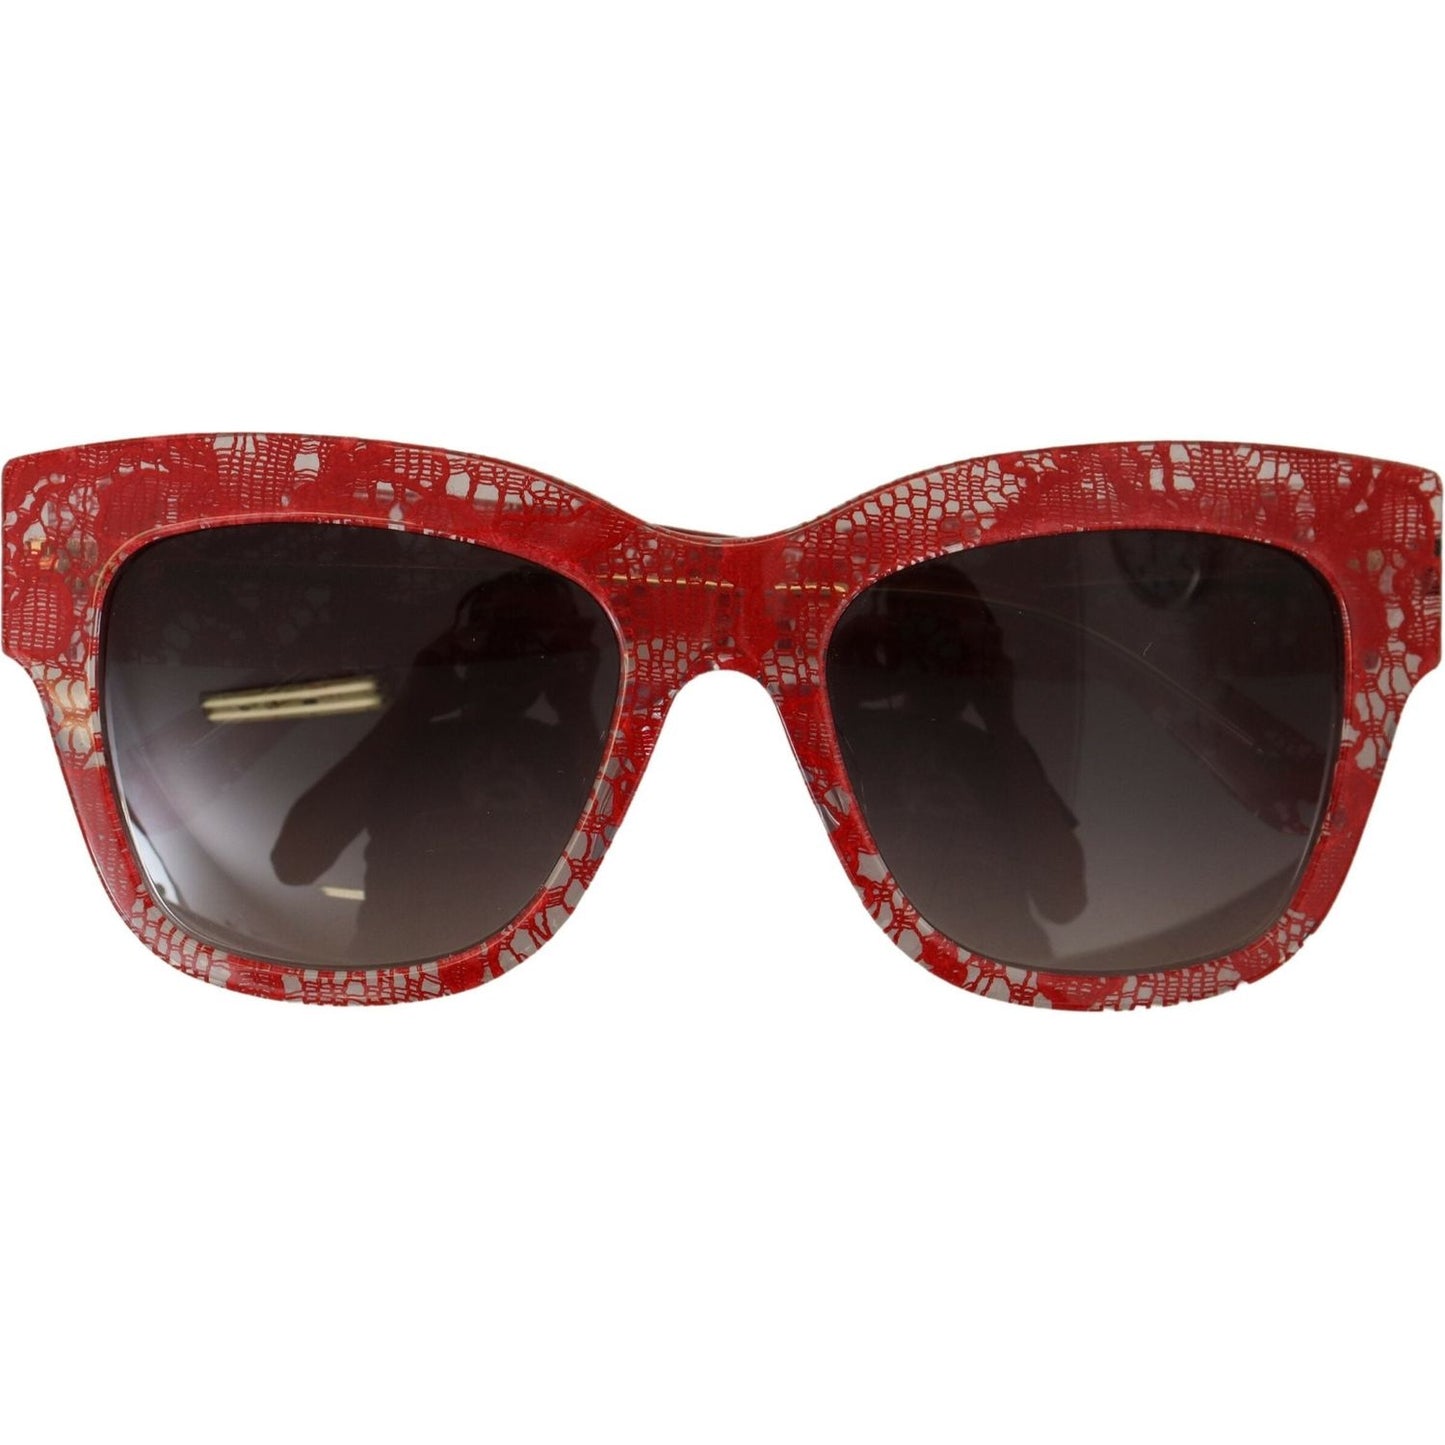 Dolce & Gabbana Elegant Red Lace Detail Sunglasses red-dg4231f-lace-acetate-rectangle-shades-sunglasses